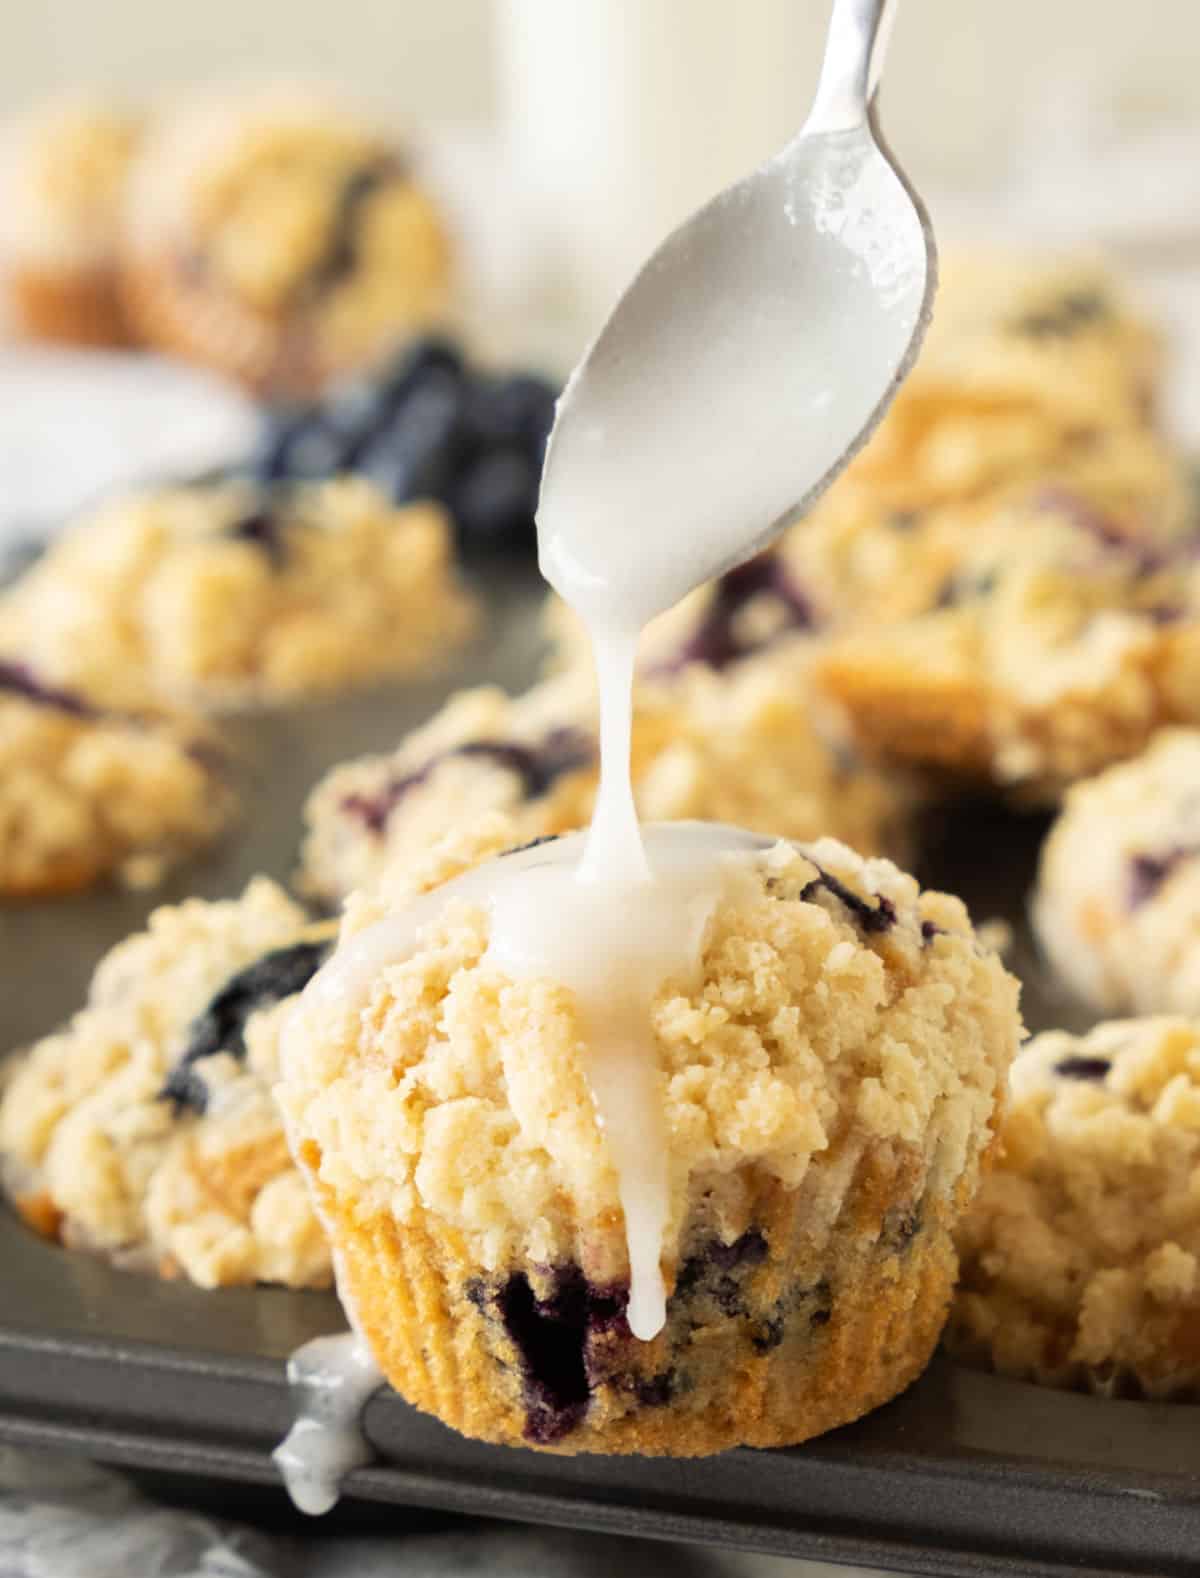 Glaze dripping from a spoon on a blueberry crumb muffin. More muffin in the background.